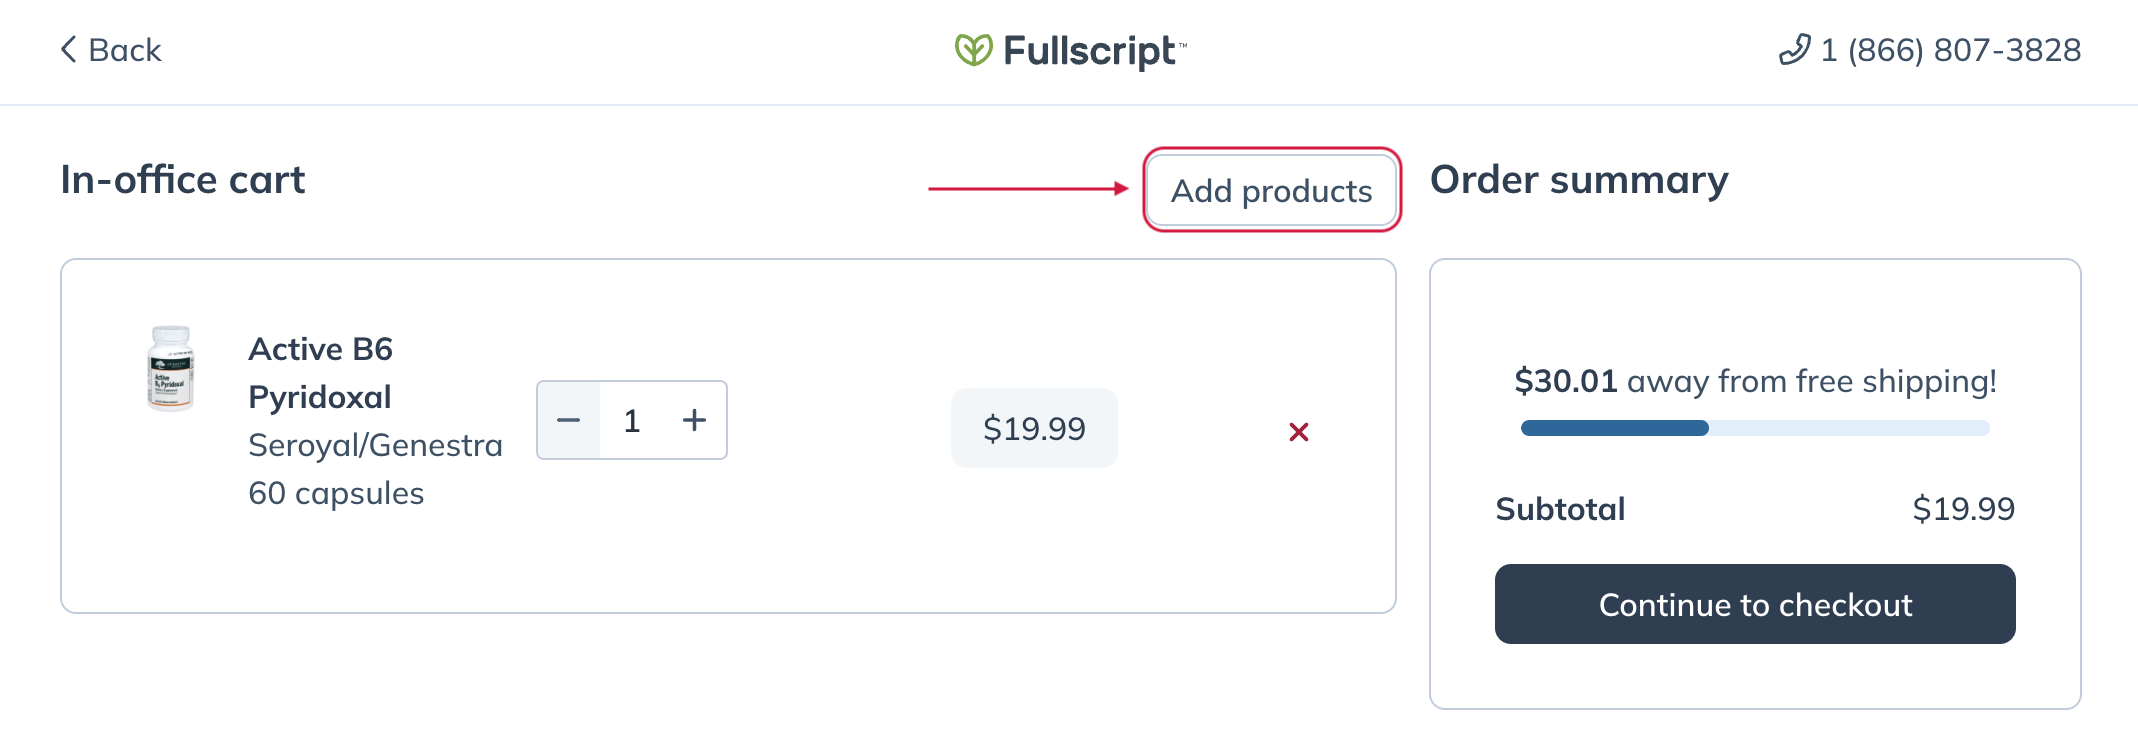 Add products button in the in-office checkout